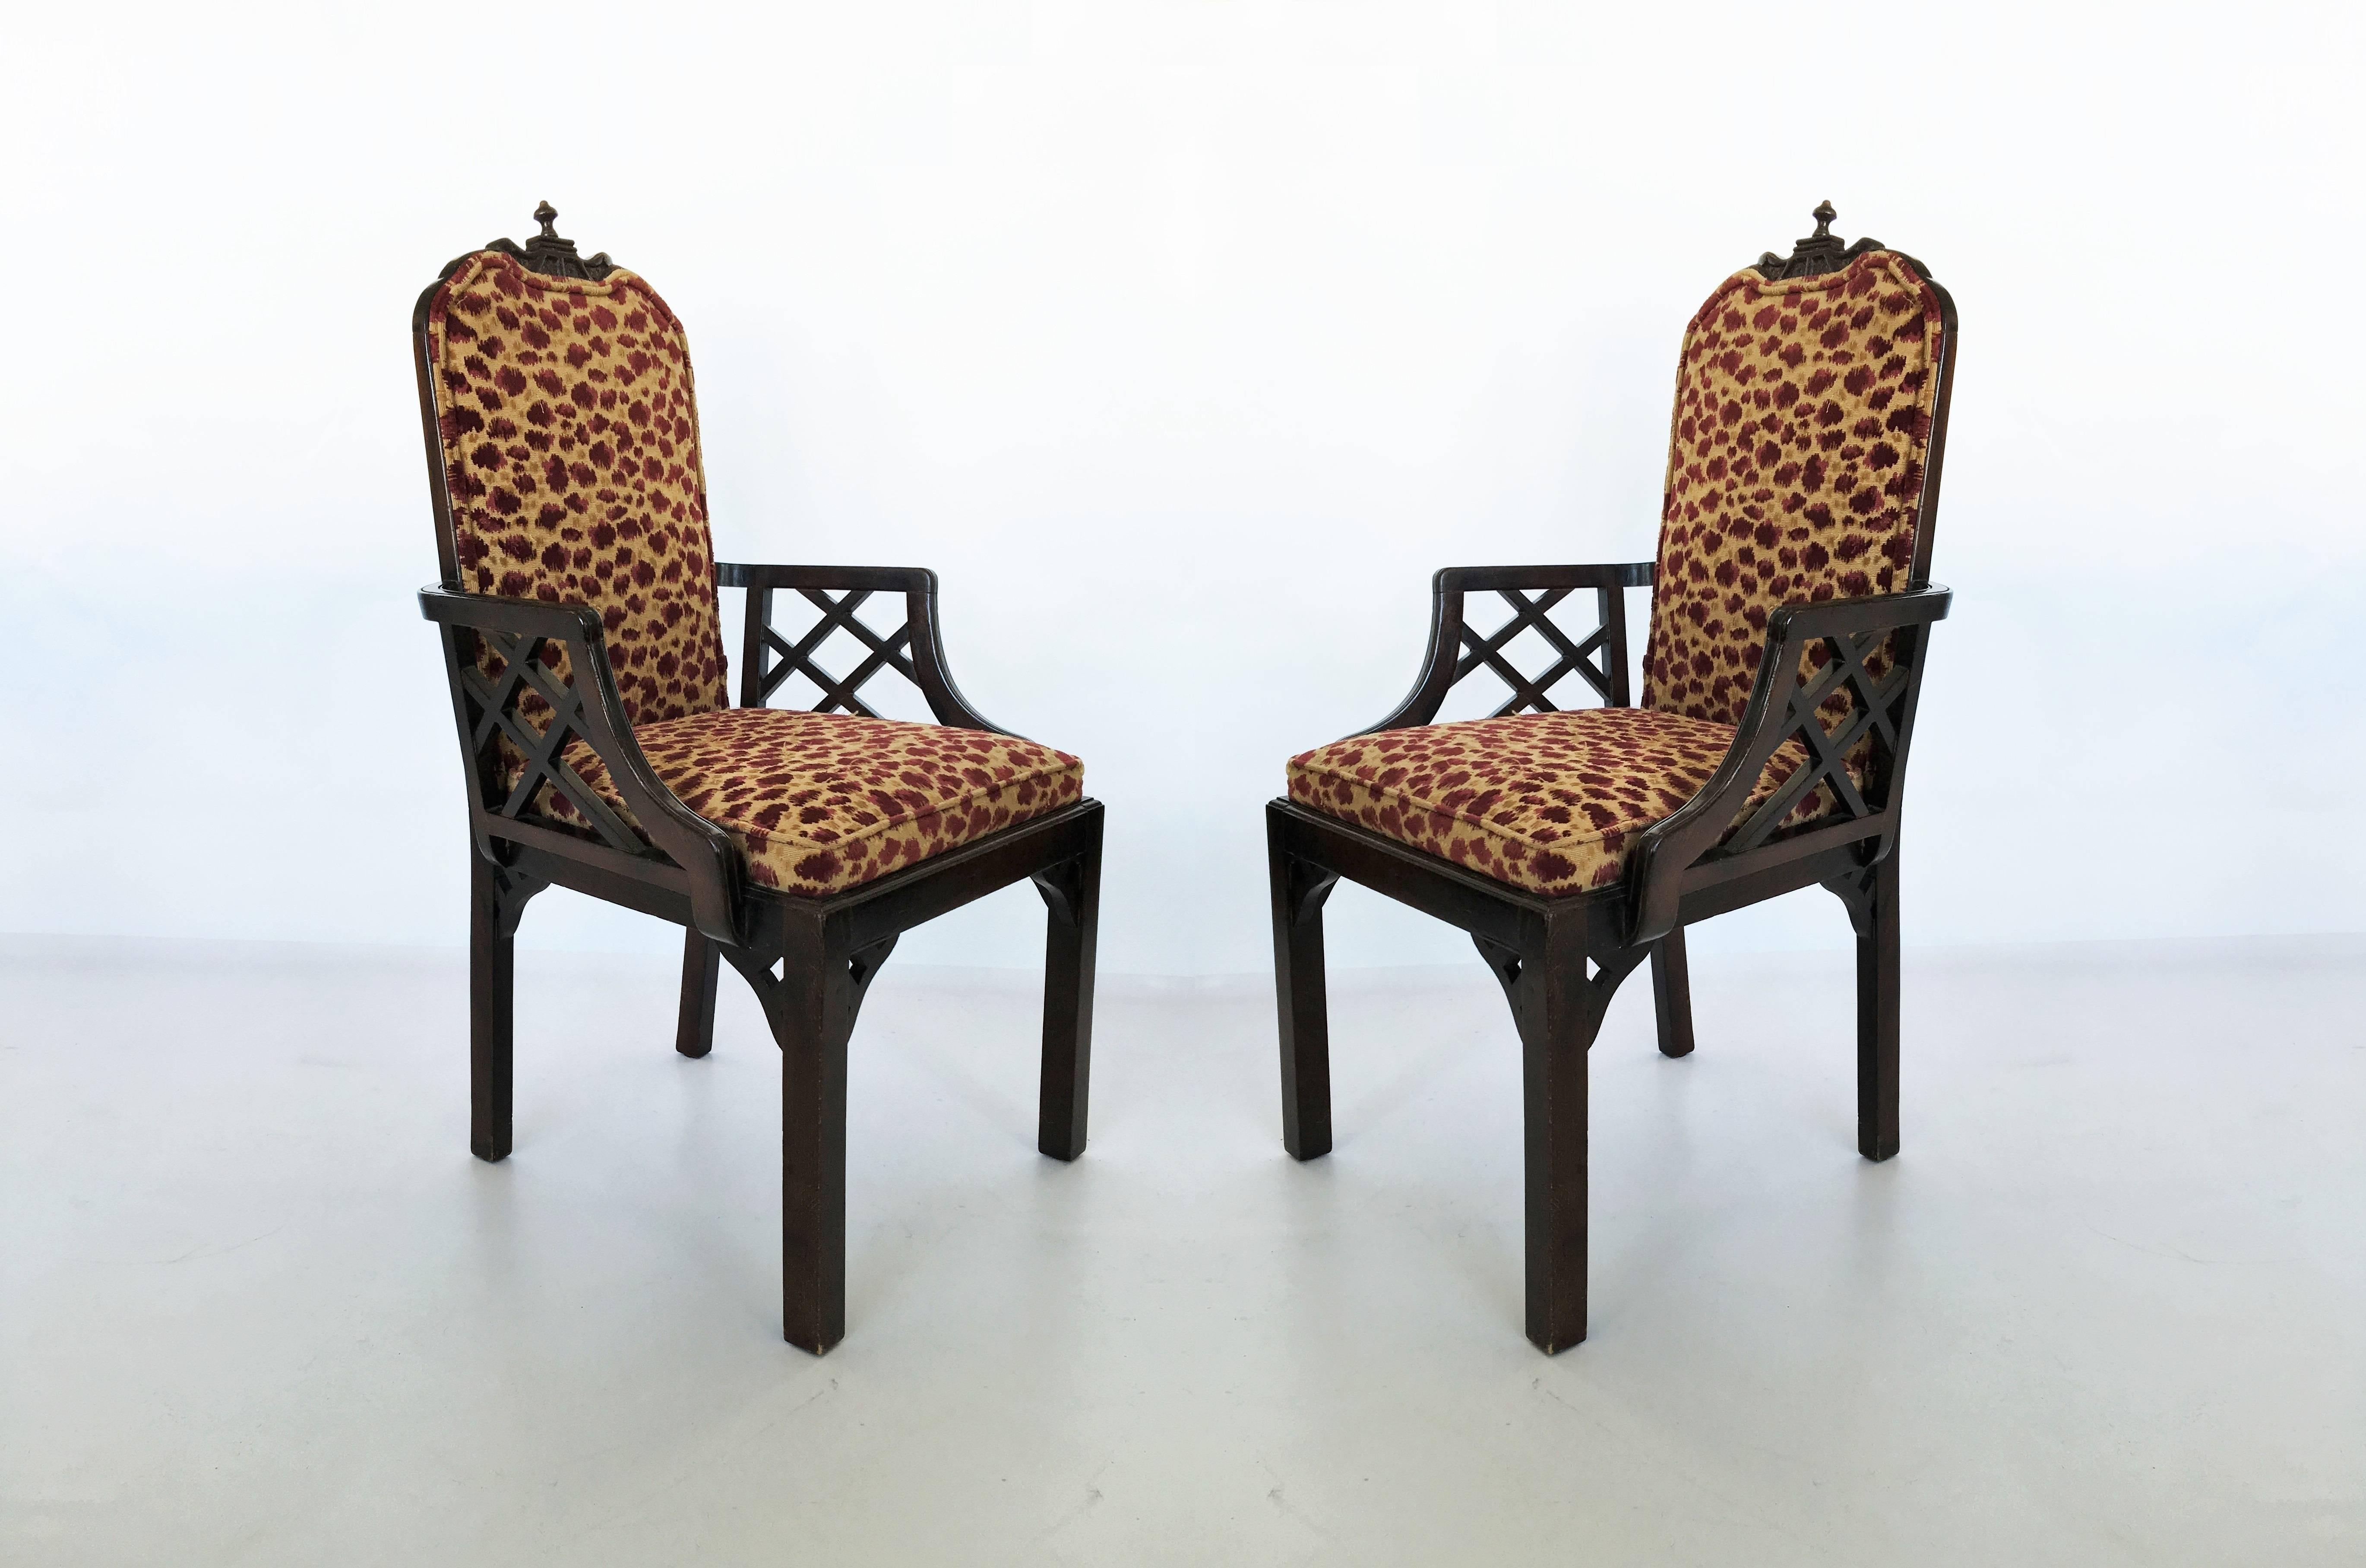 Beautiful and timeless, this vintage Chippendale dining chair set is quality crafted and features striking fretwork details. These chairs will create that sought-after Chinoiserie style to your dining setting. The set has 2 arm and 4 side chairs